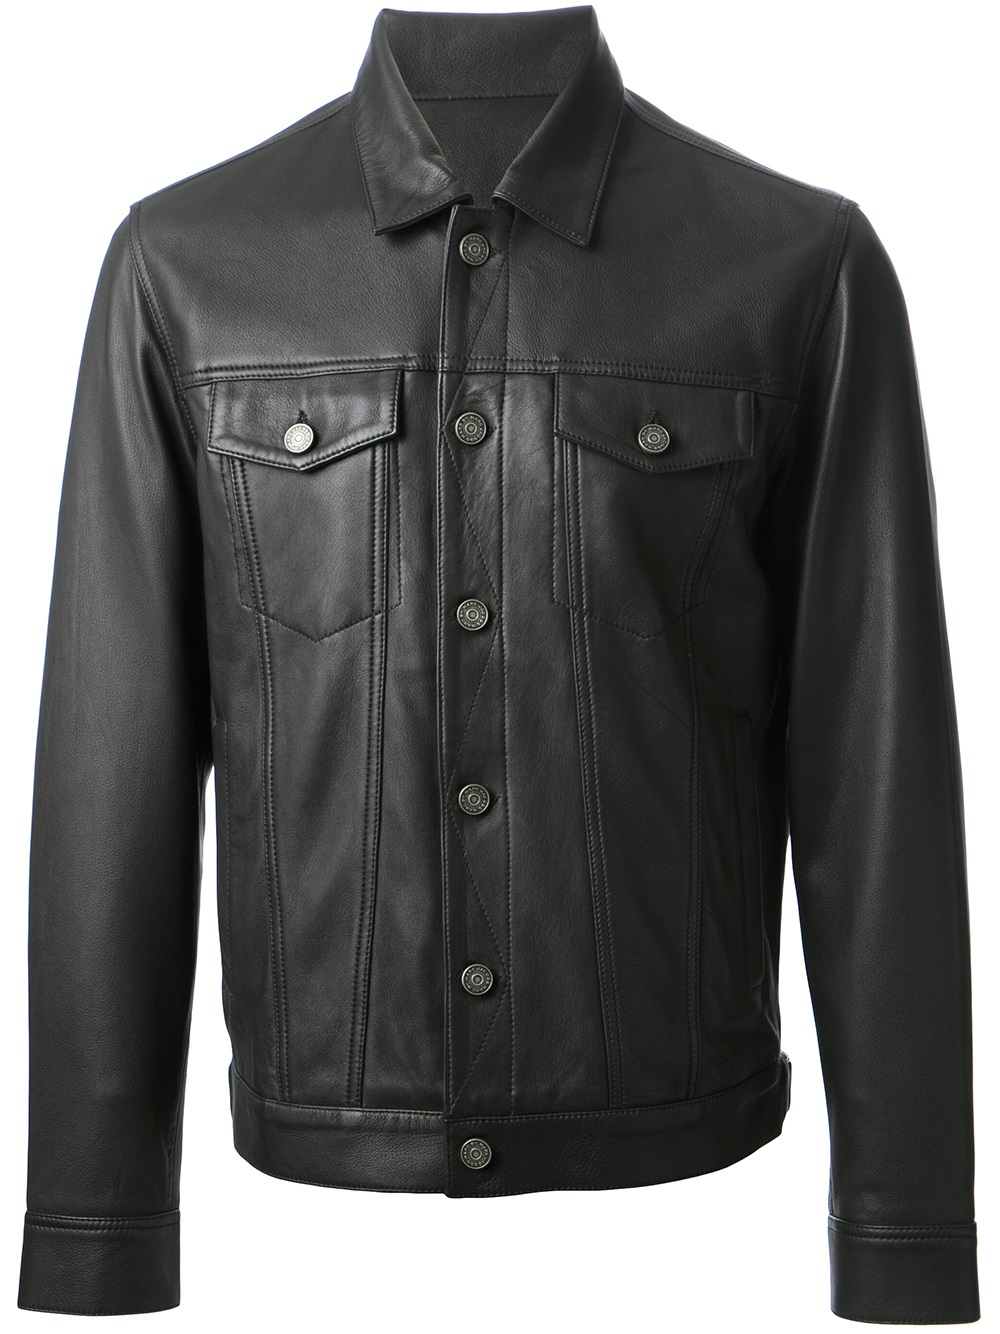 Marc By Marc Jacobs Classic Leather Jacket in Black for Men - Lyst